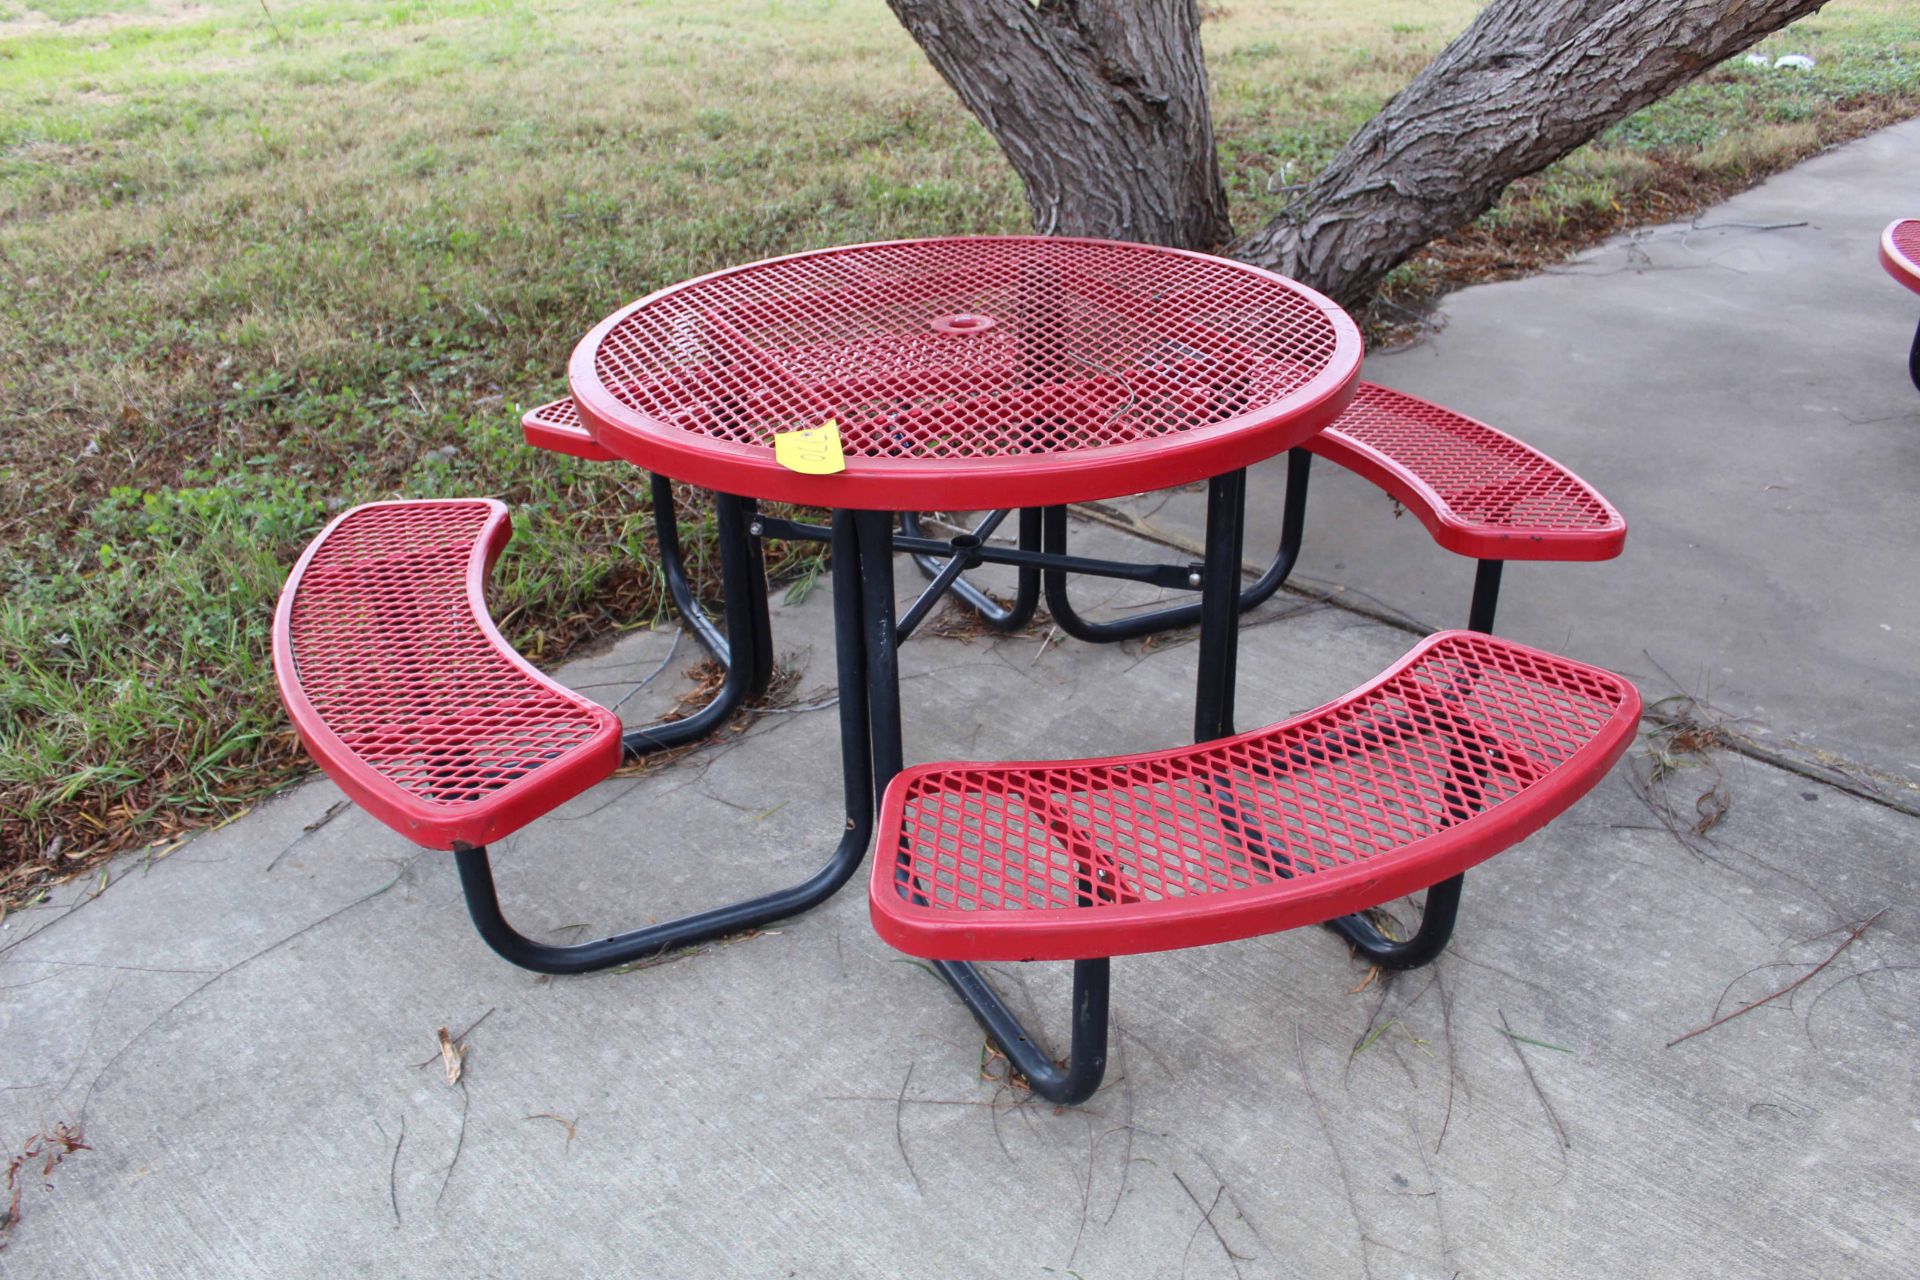 RED PICNIC TABLE, w/attach seats